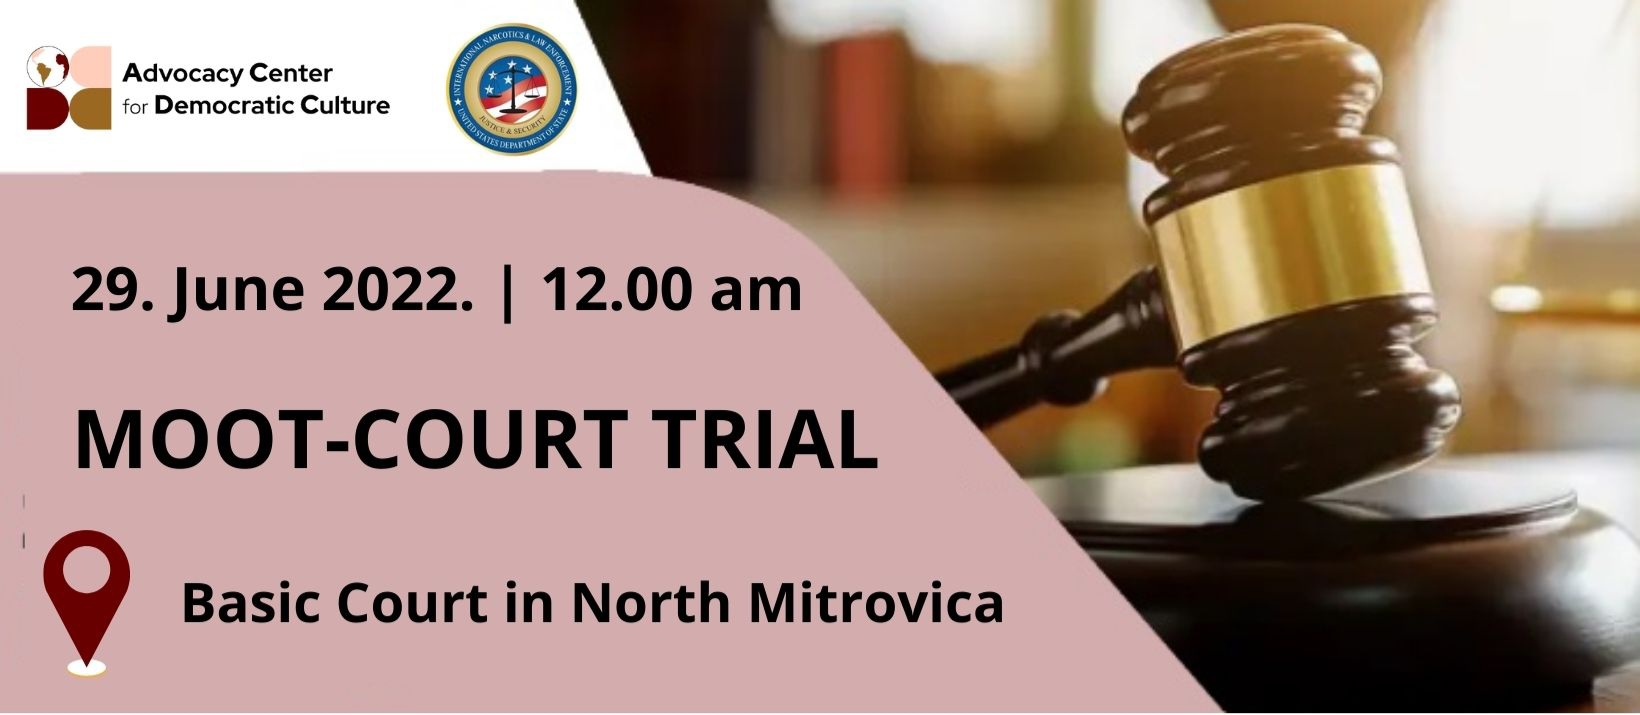 invitation-moot-court-trial-29th-of-june-2022-1200-1400